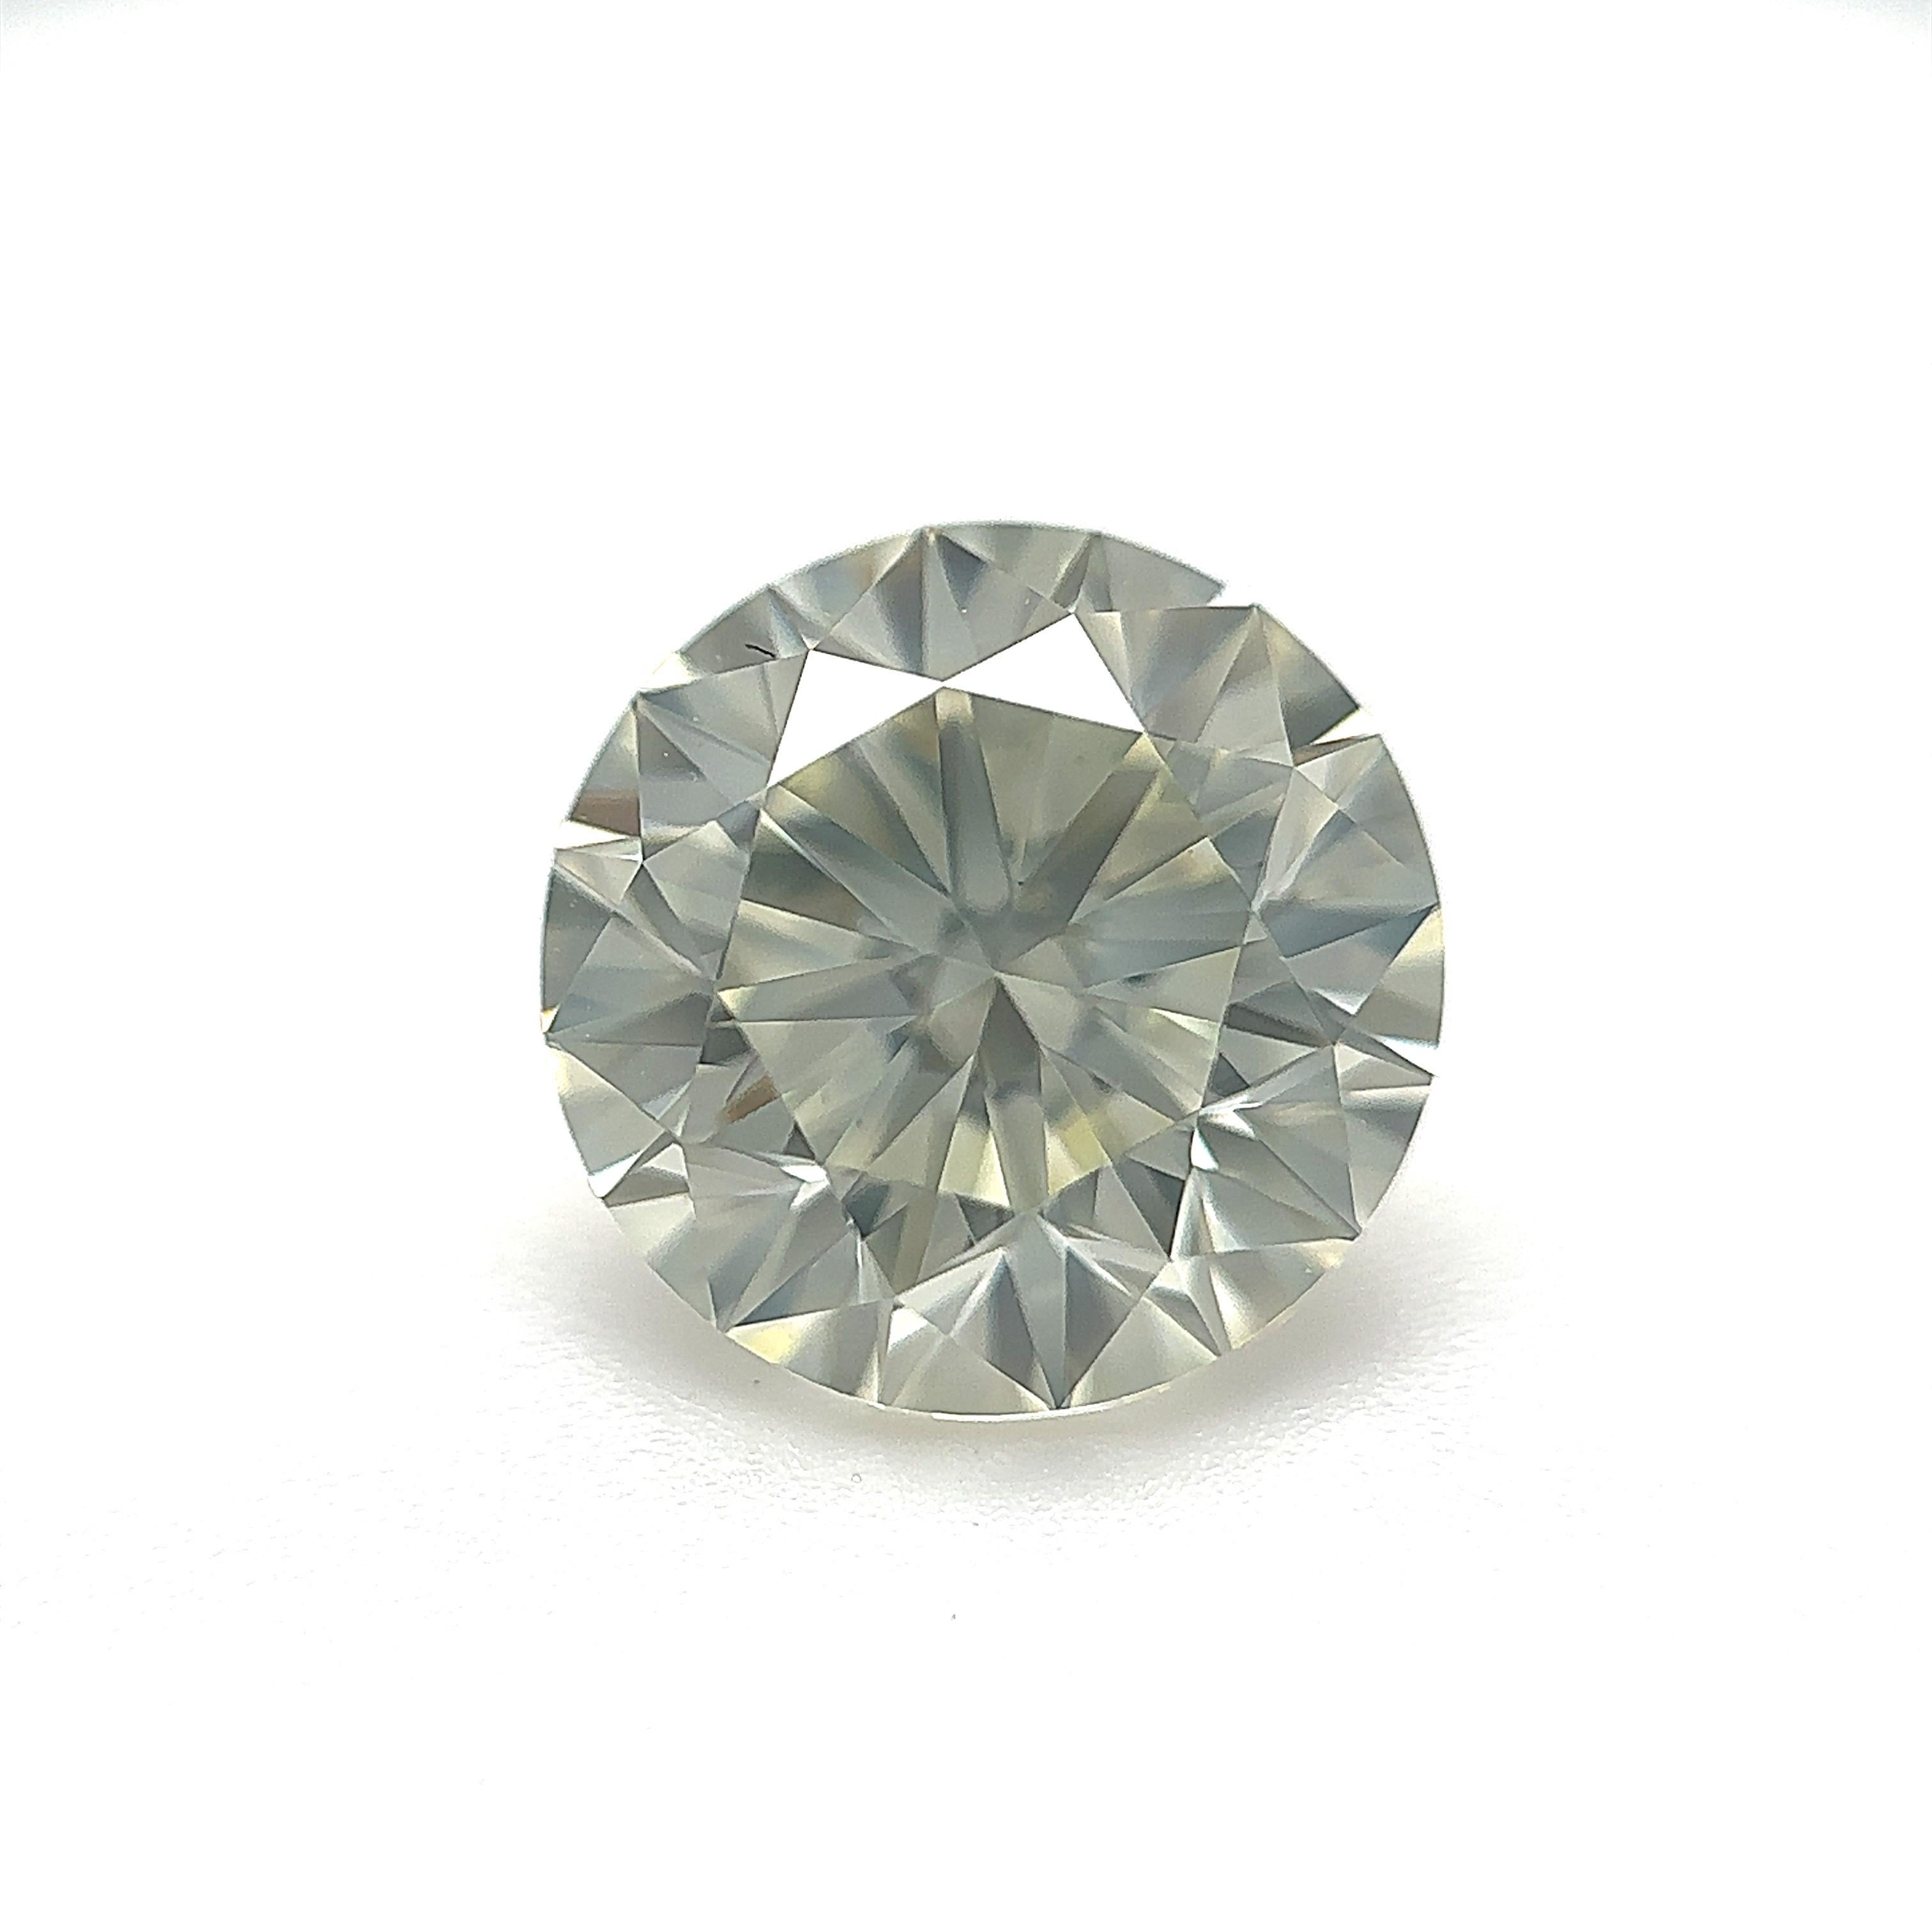 GIA Certified 2.84 Carat Round Brilliant Natural Diamond Loose Stone (Customization Option)

Color: M
Clarity: VVS2

Ideal for engagement rings, wedding bands, diamond necklaces and diamond earrings. Get in touch with us to customise your jewellery!